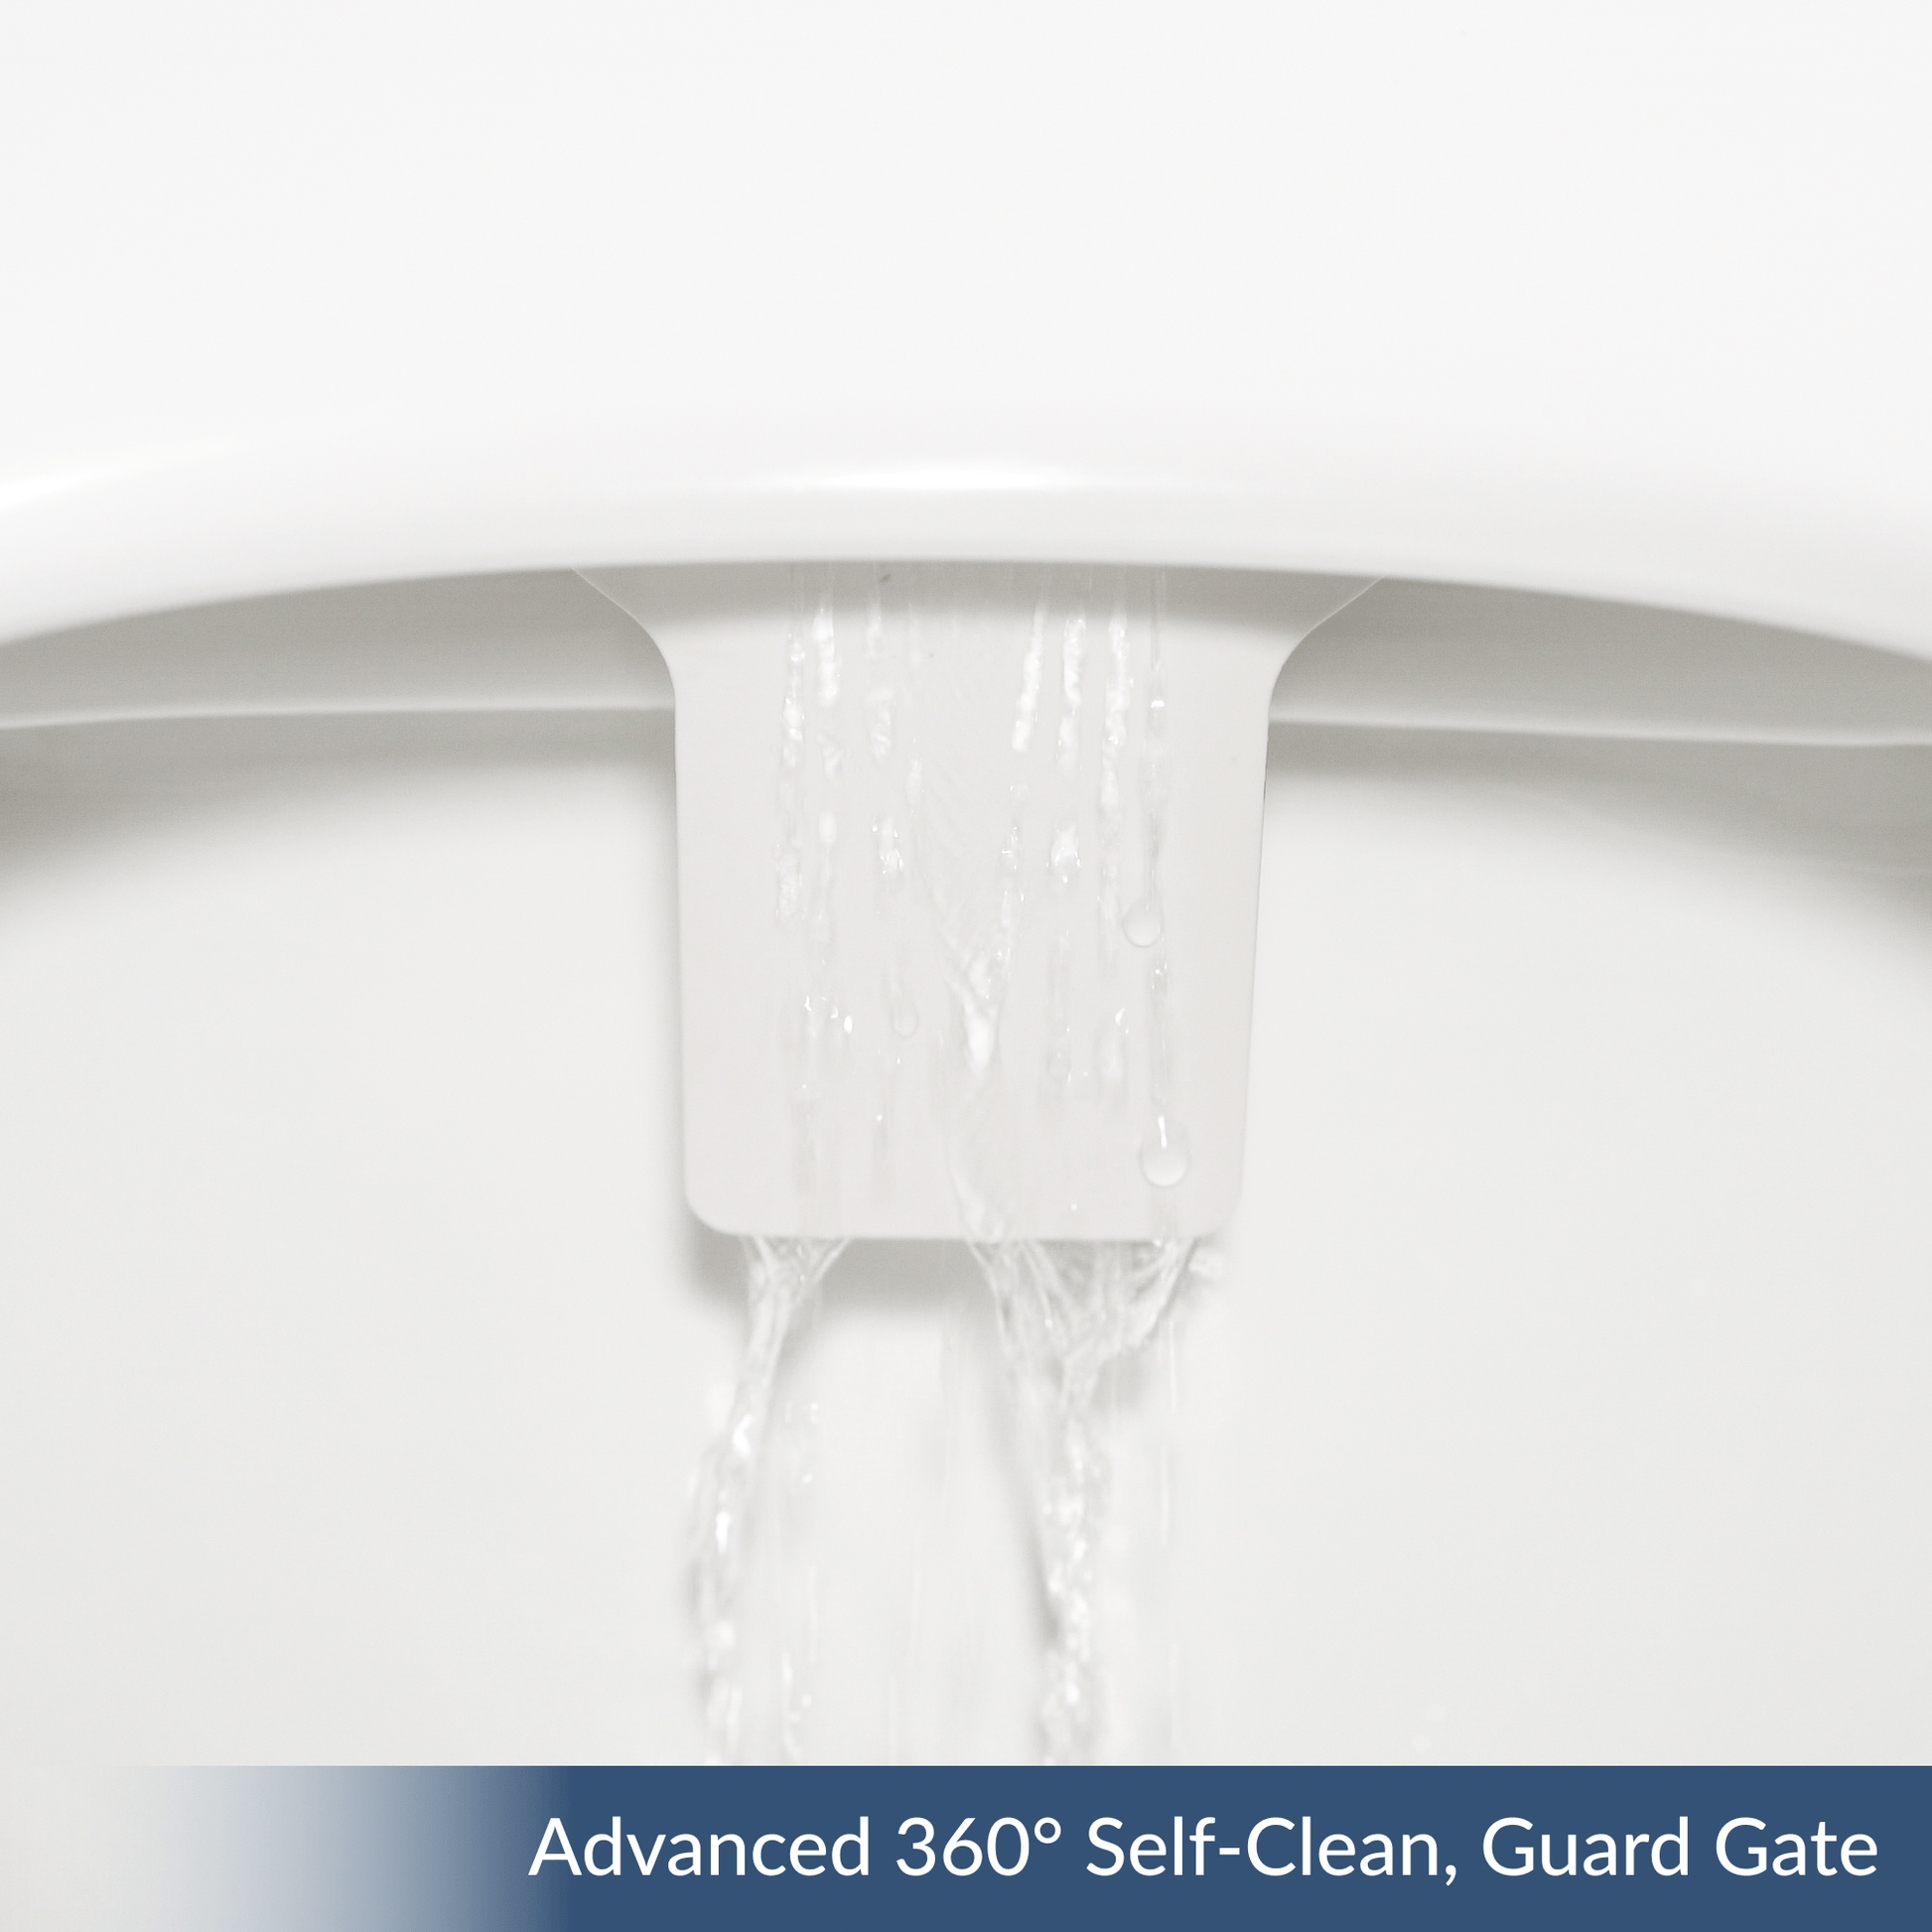 NEO 185 Plus - Advanced 360° Self-Clean feature of NEO Plus series running water down the guard gate to clean them